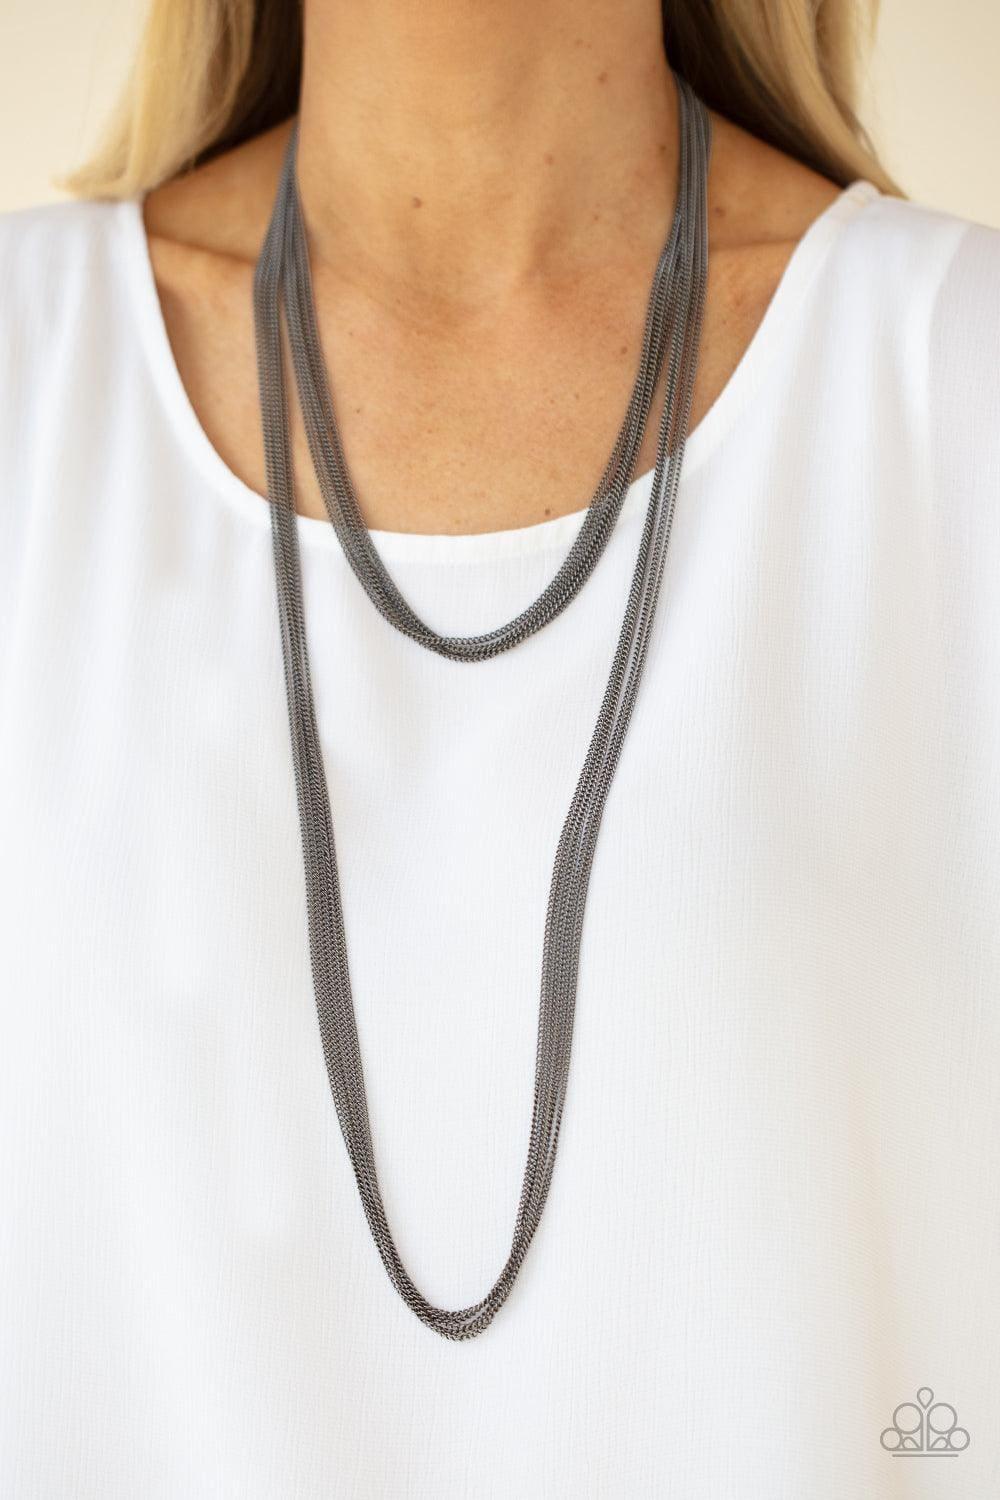 Paparazzi Accessories - Save Your Tiers - Black Necklace - Bling by JessieK